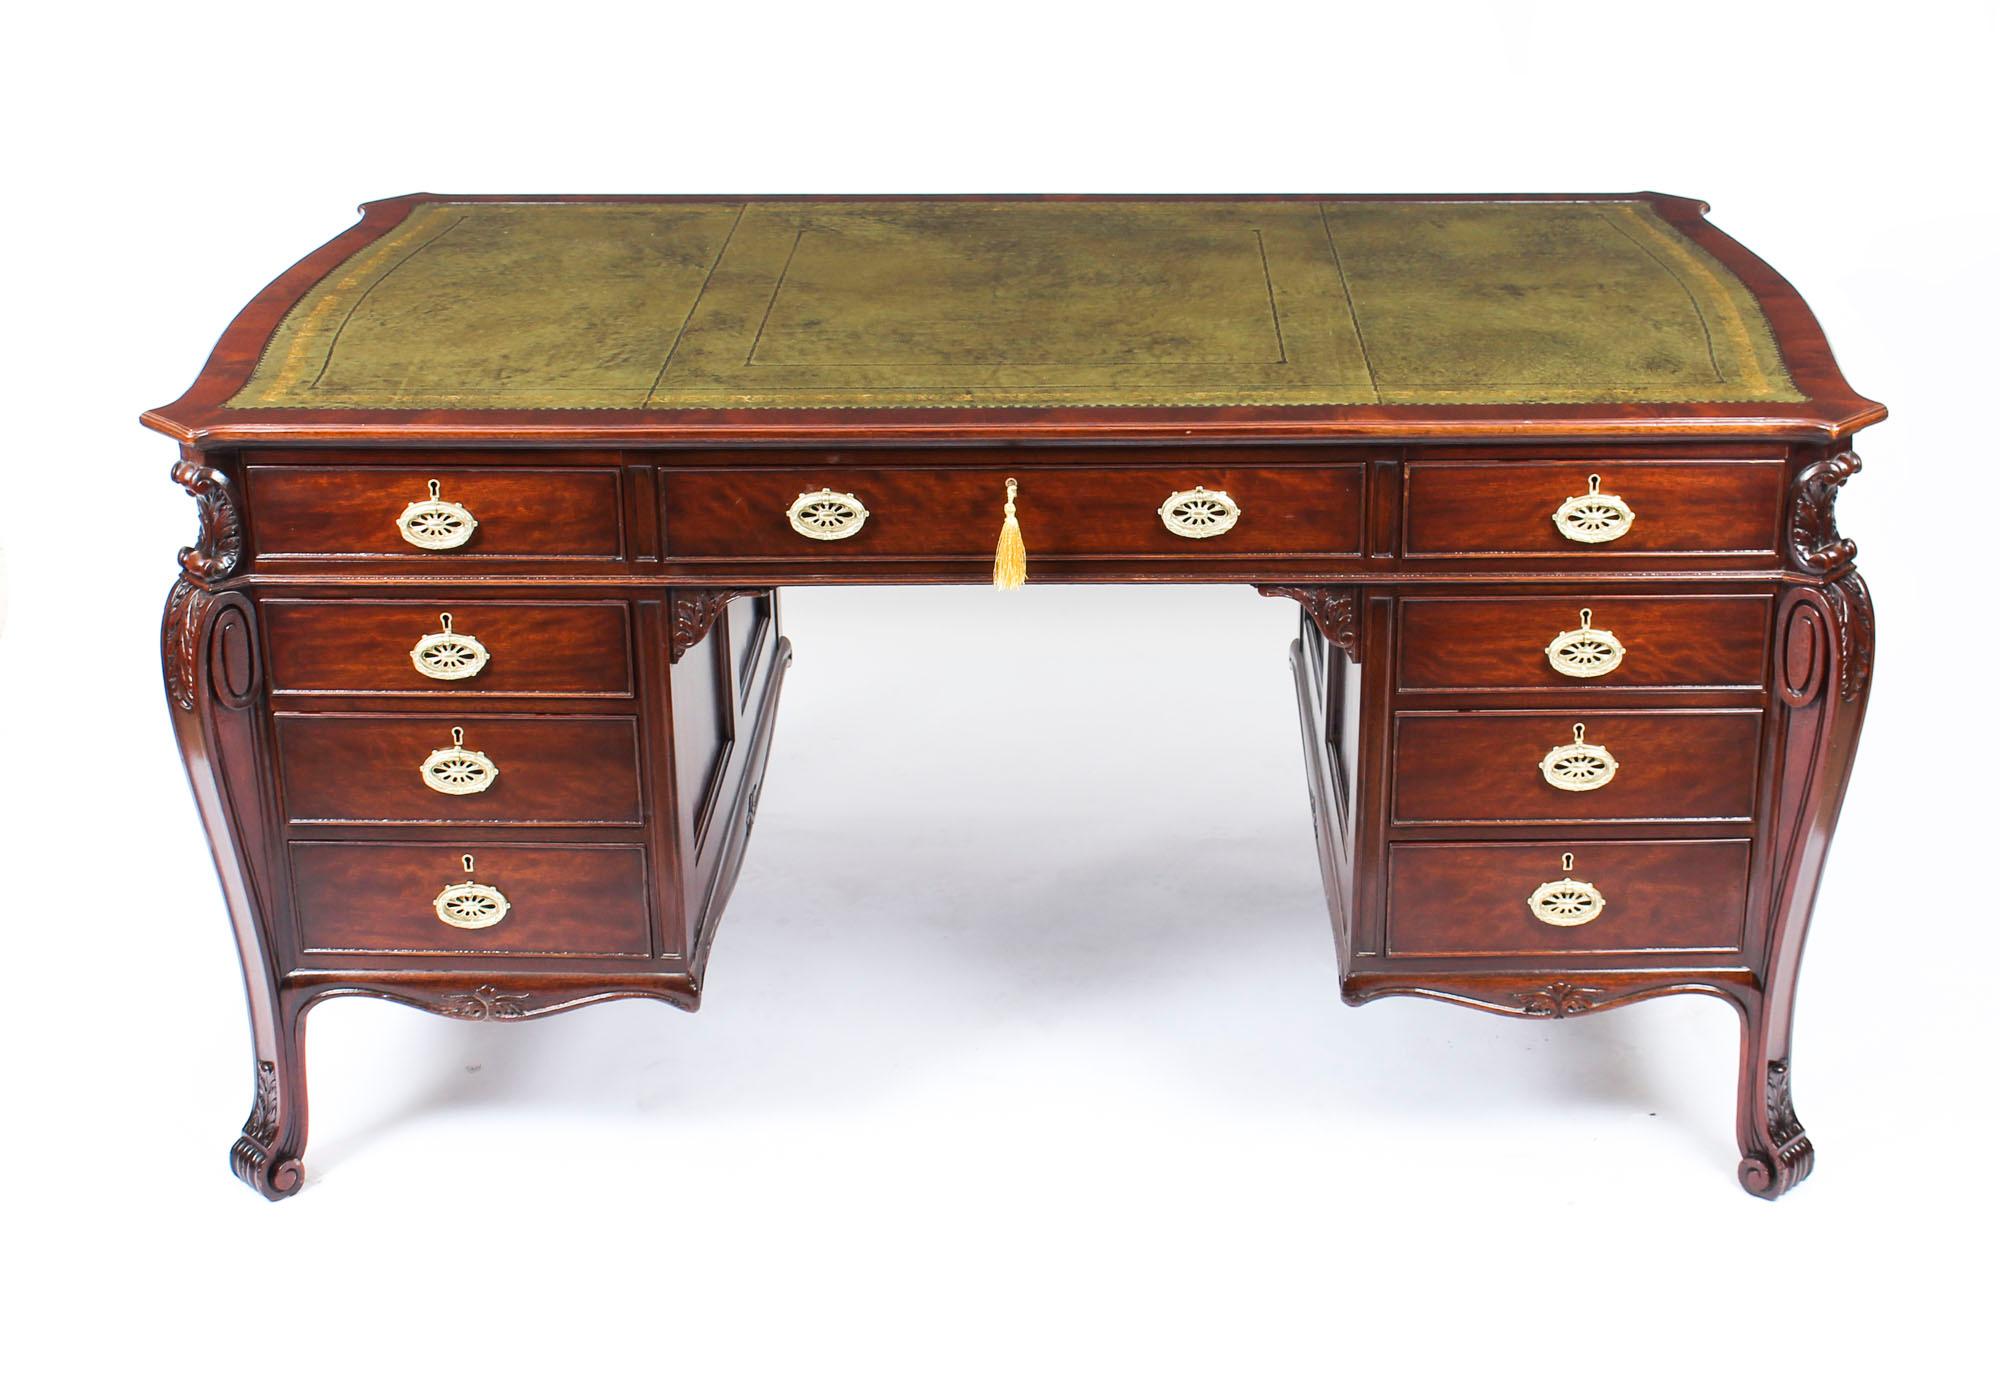 This is a stunning Georgian Revival mahogany partners pedestal desk, circa 1880 in date.
 
The desk features an inverted shaped rectangular top with an inset olive green gold tooled leather above a frieze with three drawers.

The acanthus moulded